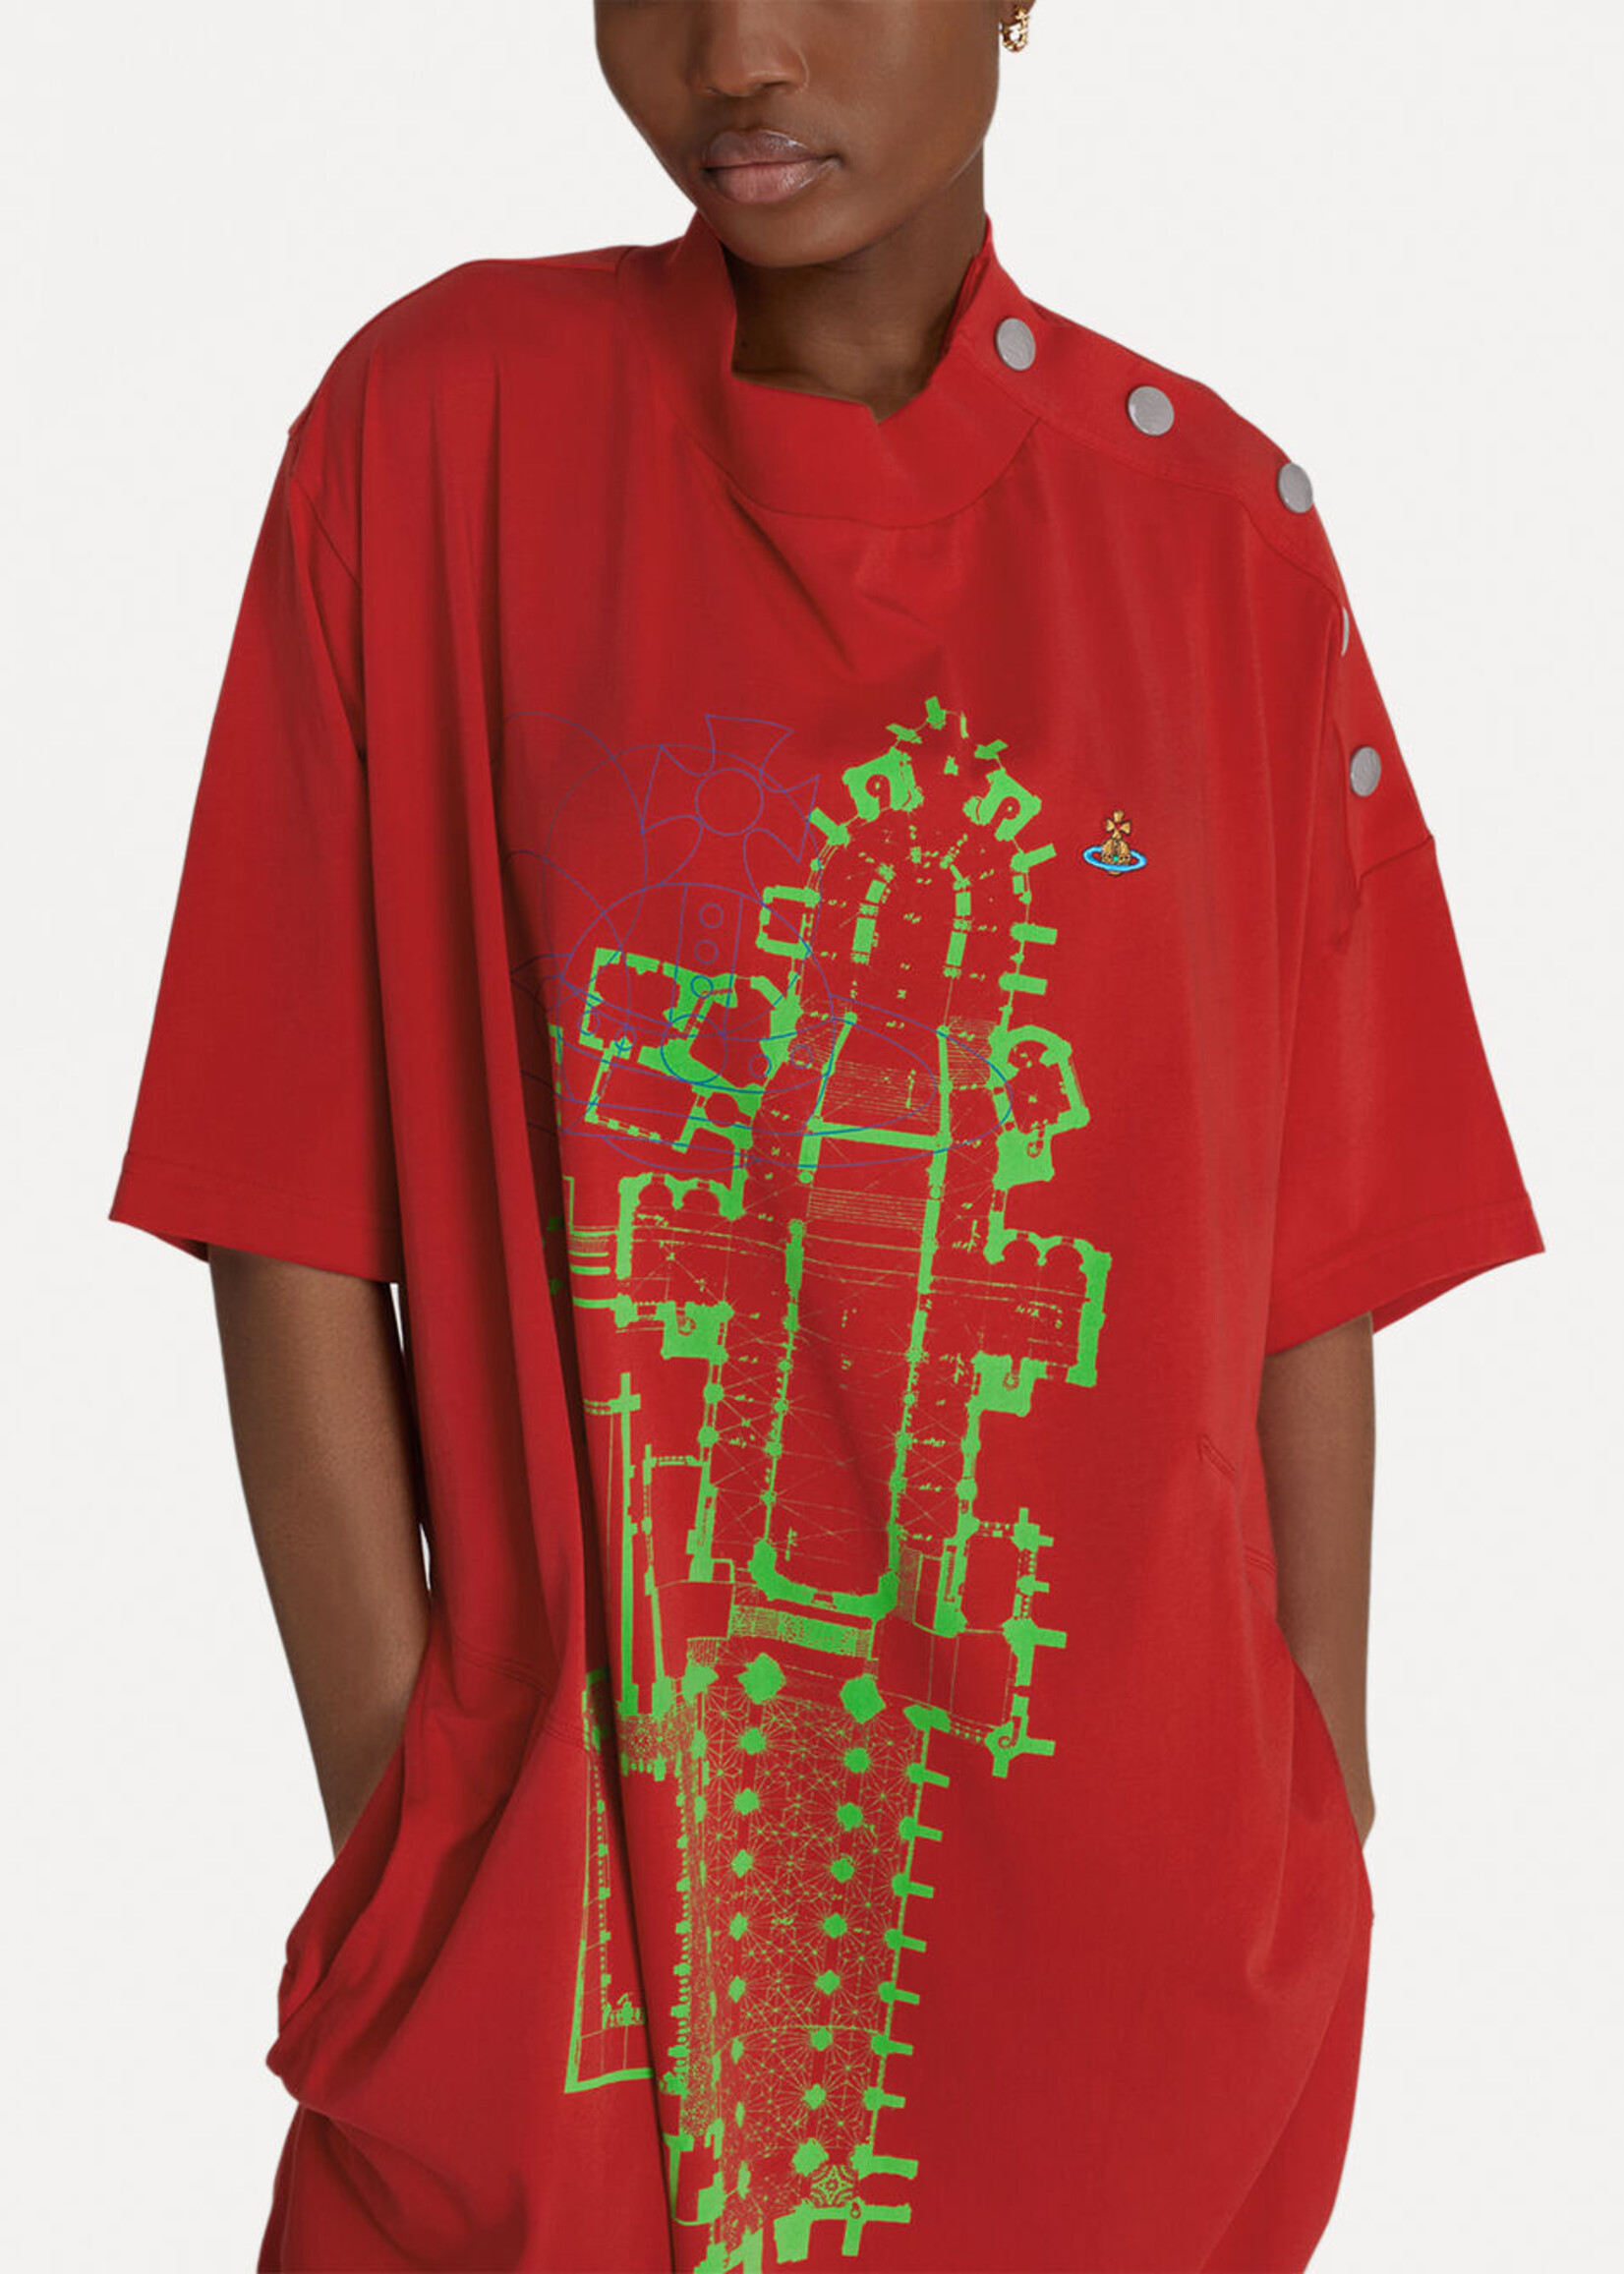 VIVIENNE WESTWOOD Cathedral T-shirt Dress in Red